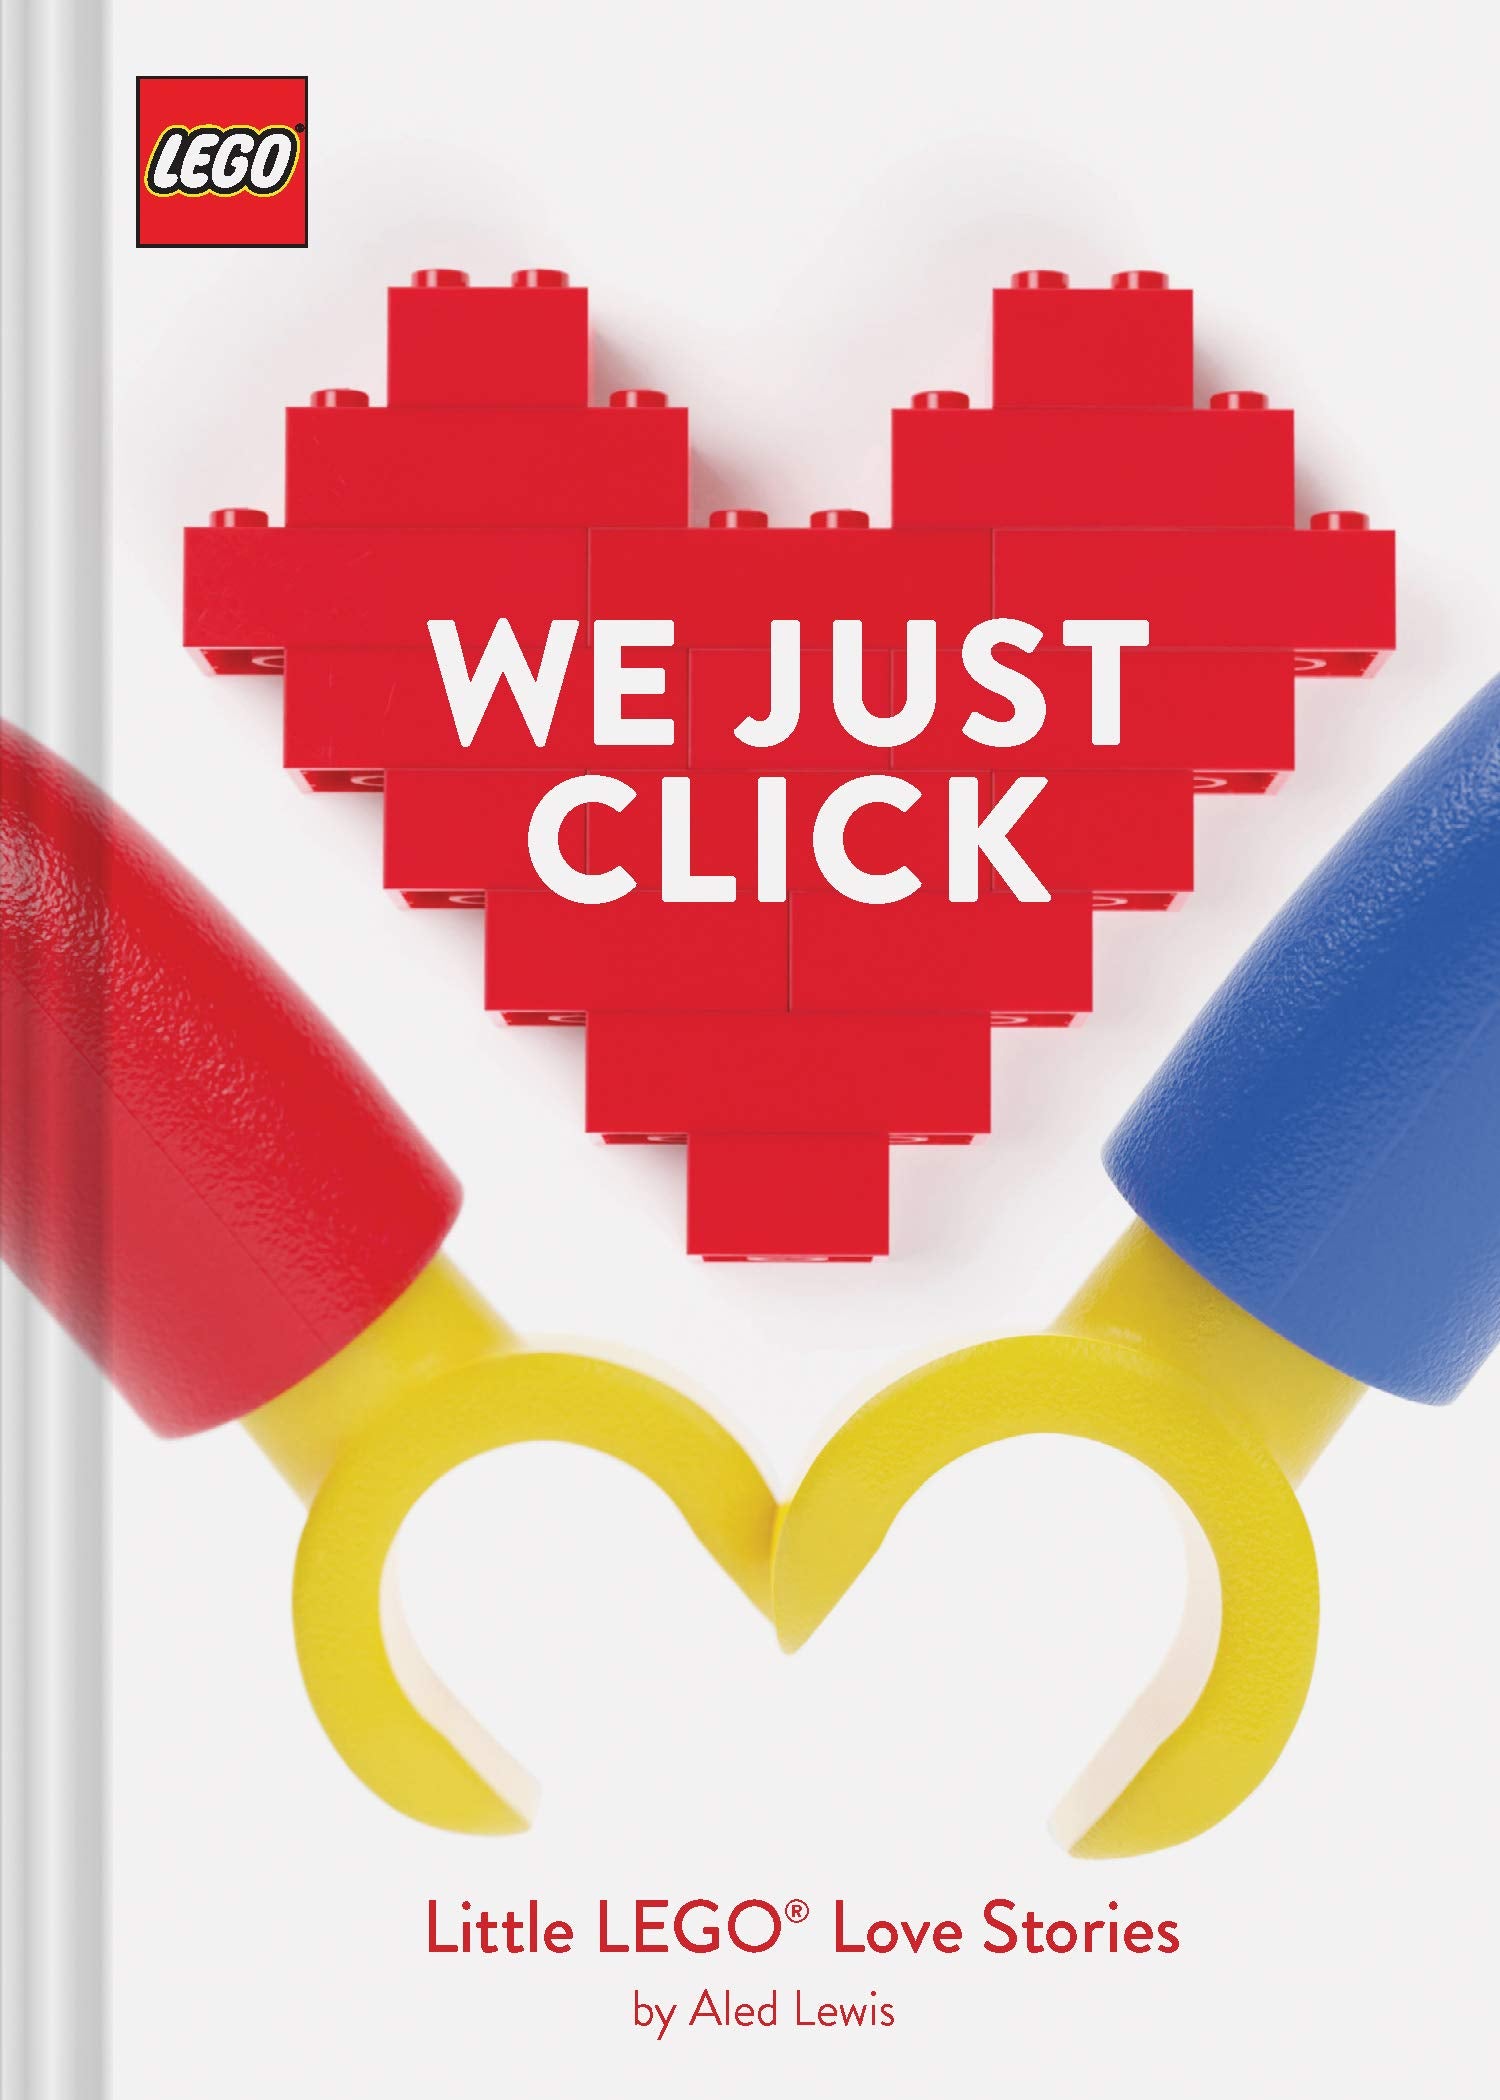 Little Lego Love Stories: We Just Click